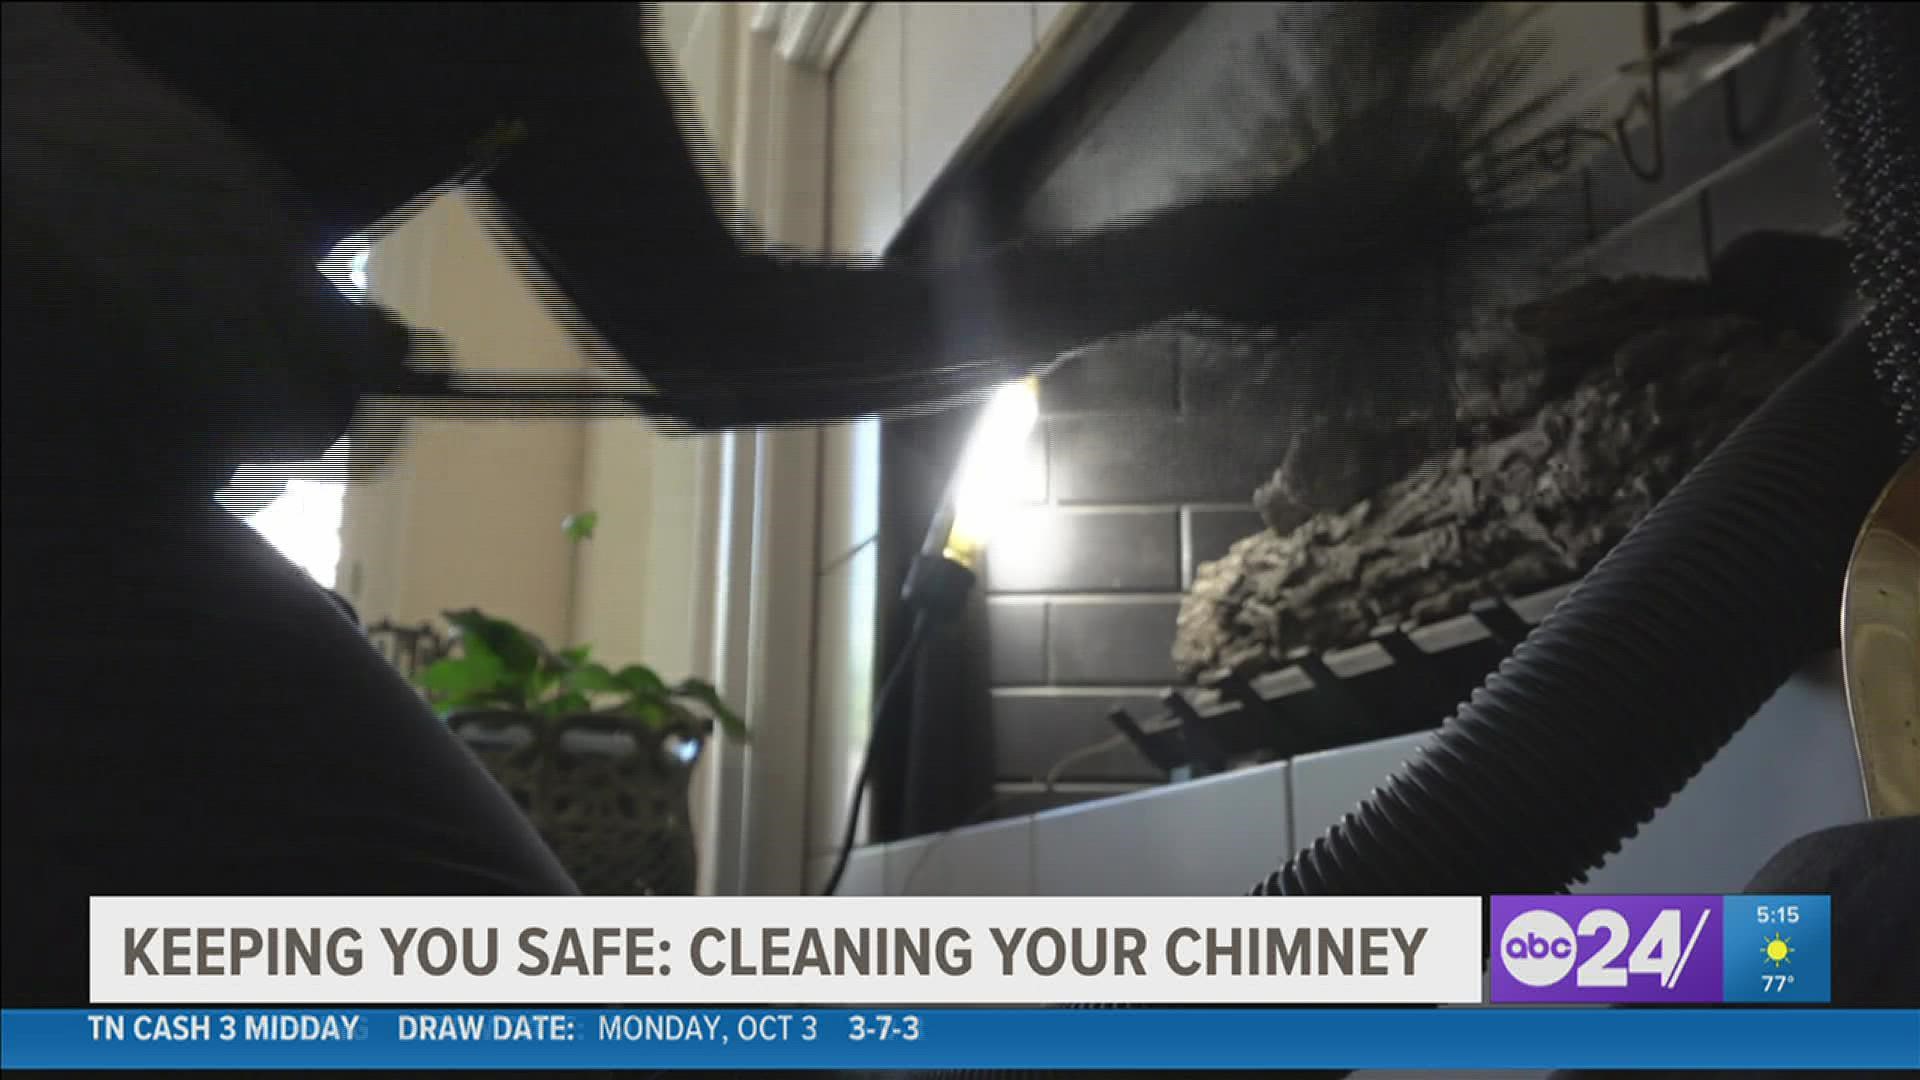 It’s National Chimney Safety Week, and it's a good time before the temperatures drop to make sure everything is cleaned before the holidays.